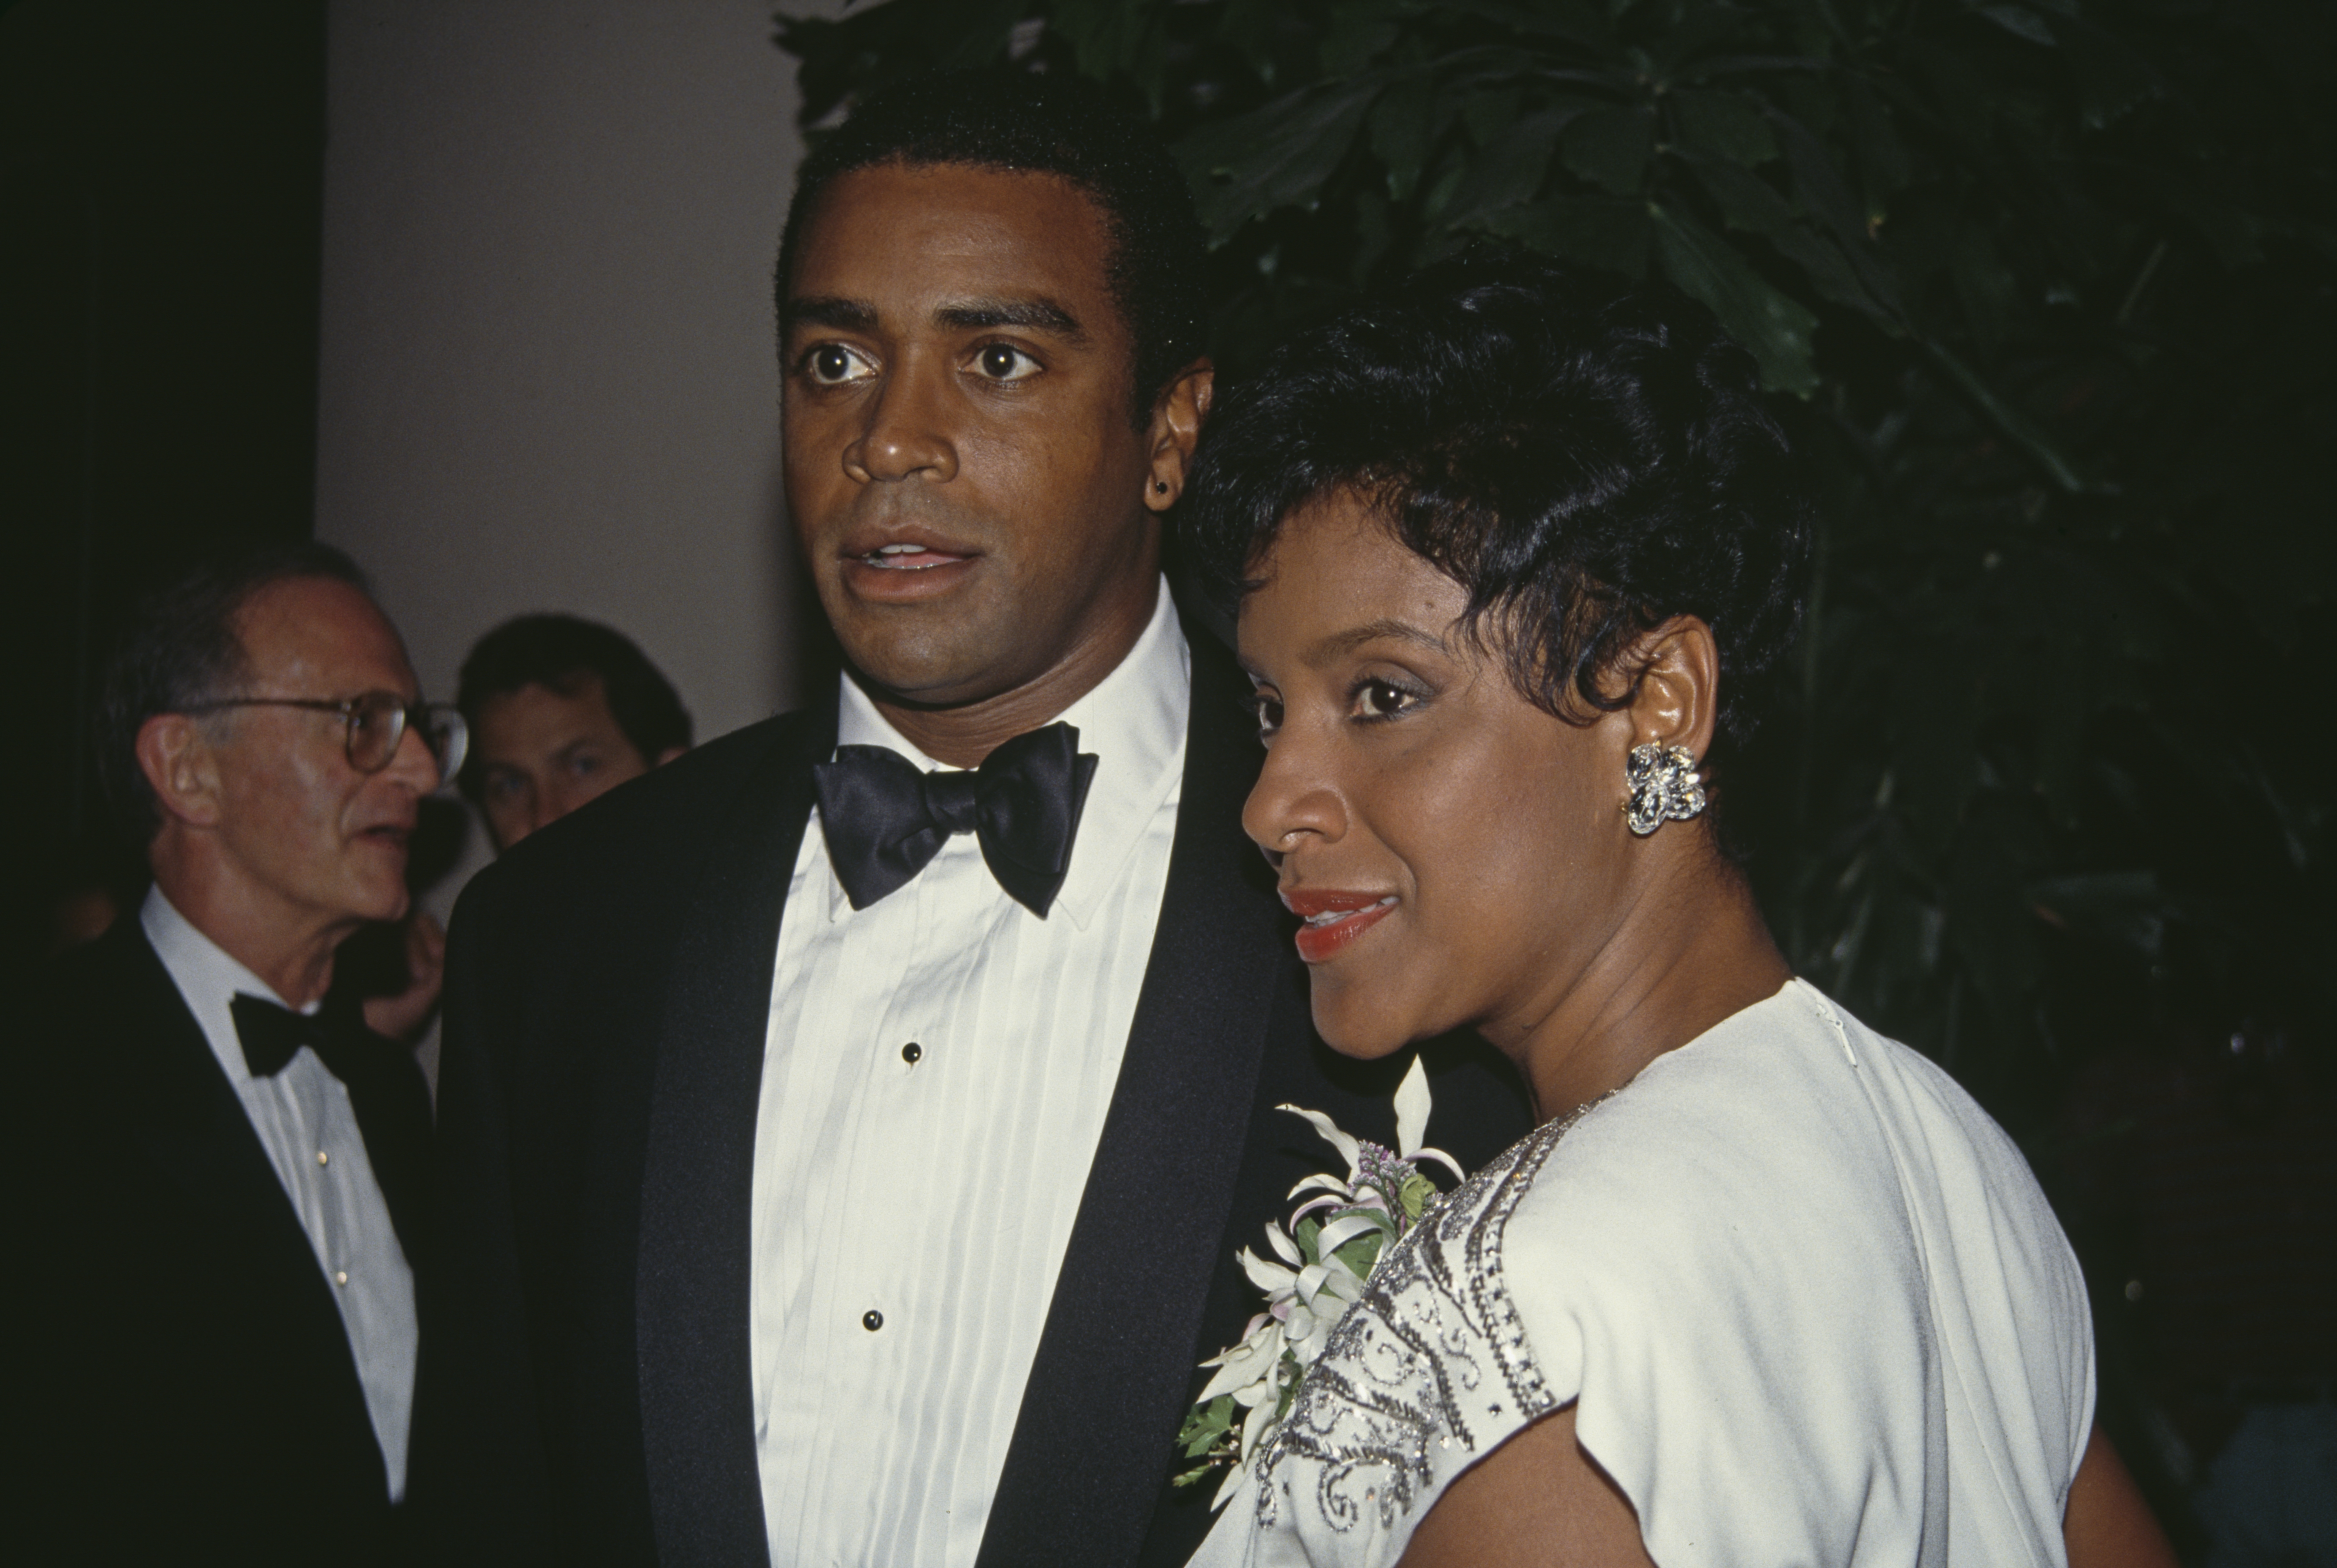 Ahmad Rashad and Phylicia Rashad attend the Carousel Of Hope Ball Benefit at the Beverly Hilton Hotel on October 2, 1992, in Beverly Hills, California. | Source: Getty Images